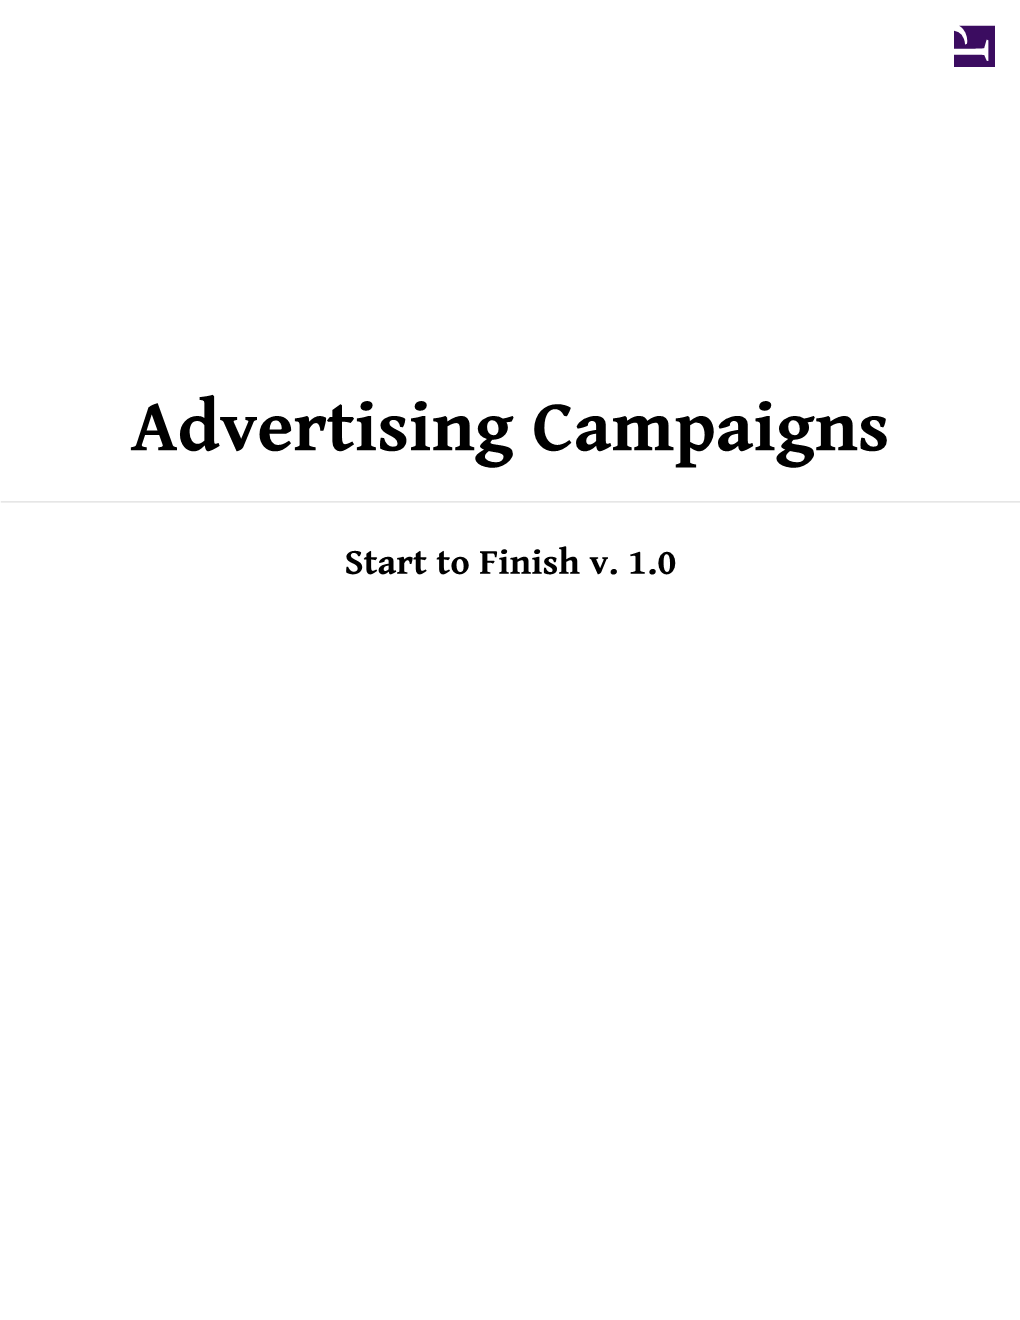 Advertising Campaigns: Start to Finish (V